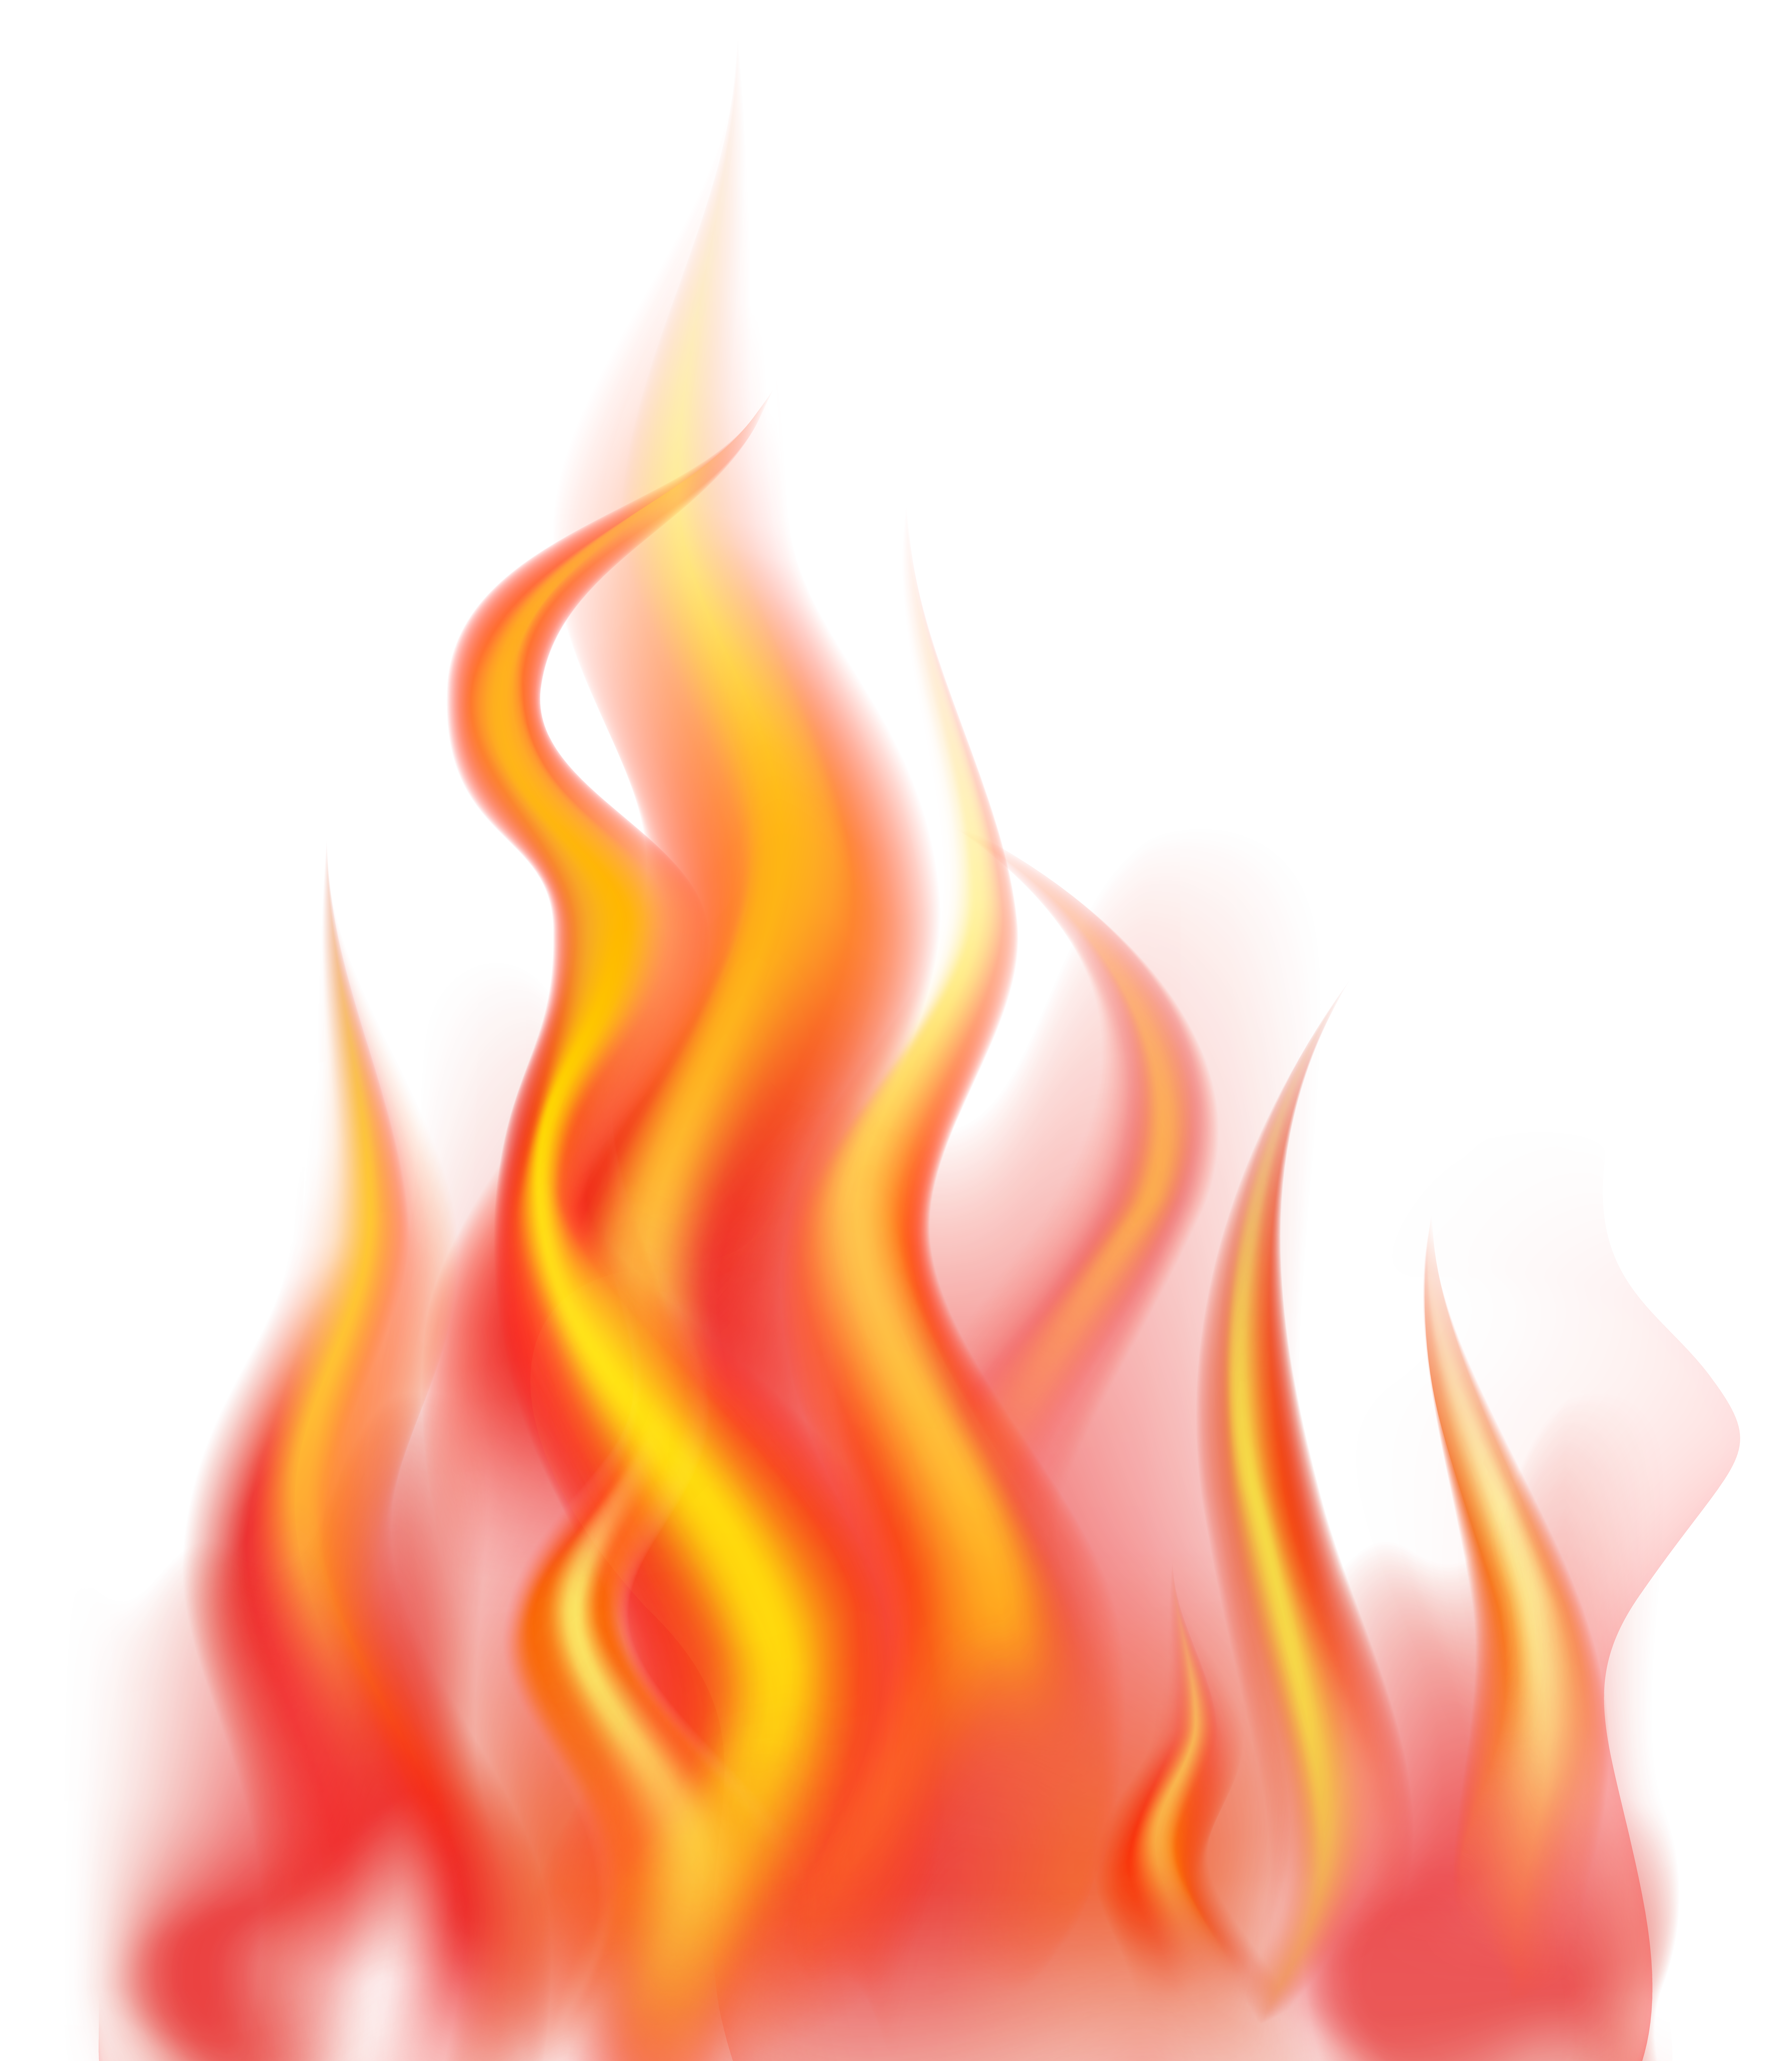 Fire Flames Transparent PNG Clip Art | Gallery Yopriceville - High ...